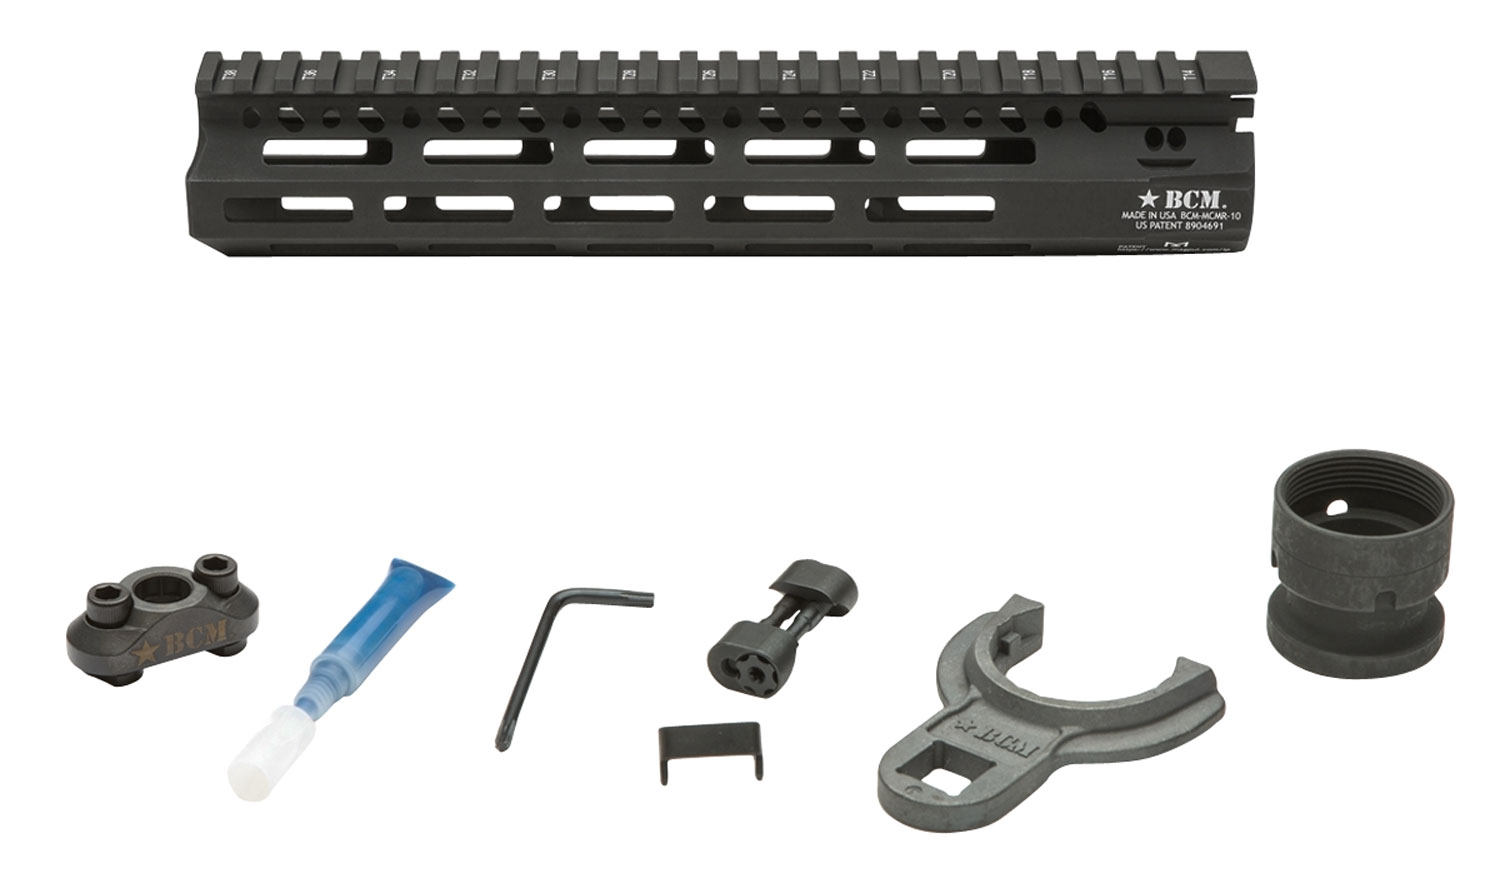 BCM MCMR10556BLK BCMGunfighter MCMR 10